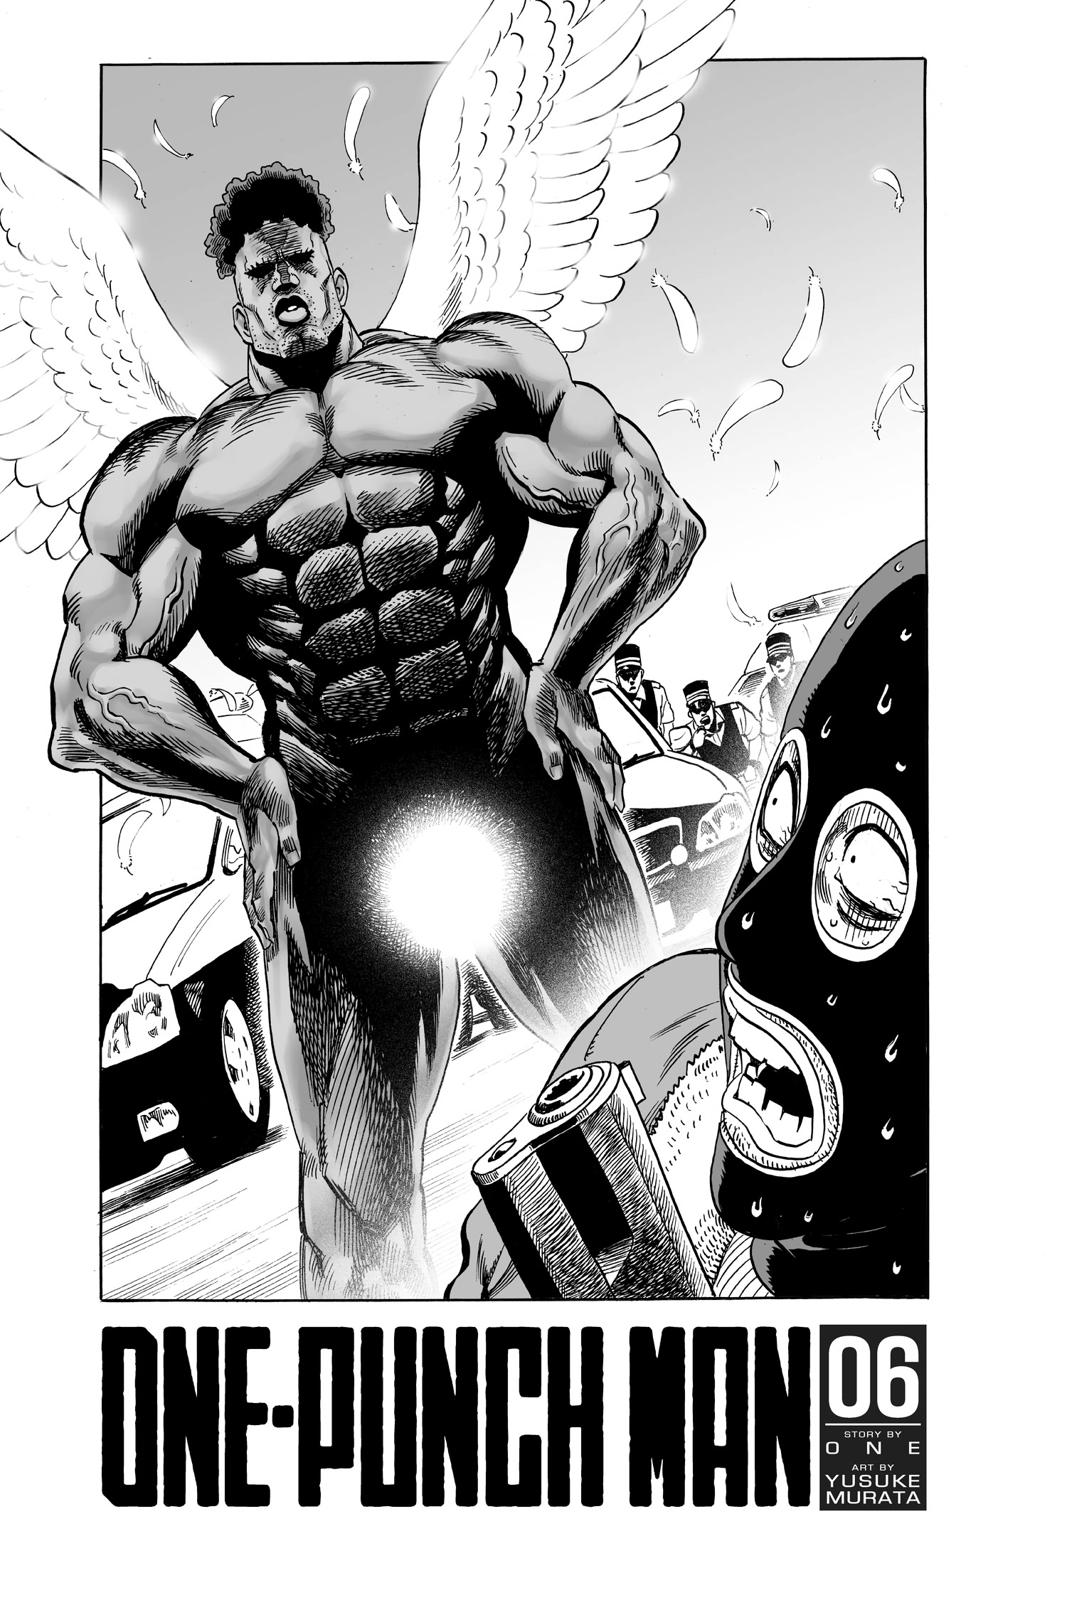 One-Punch Man, Punch 30 image 04